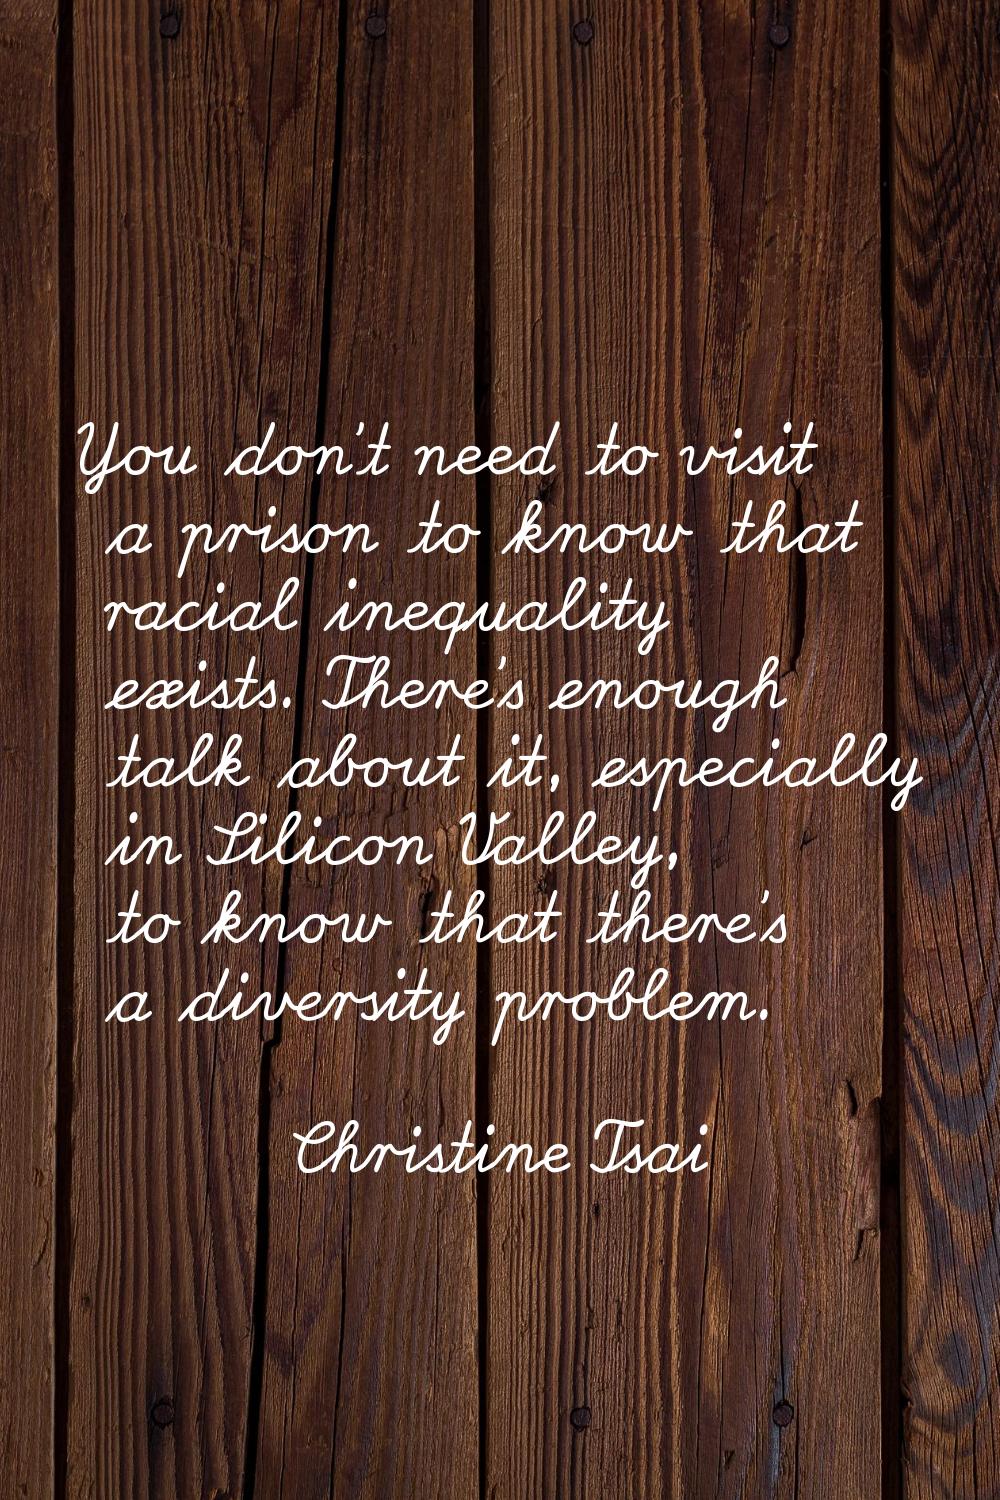 You don't need to visit a prison to know that racial inequality exists. There's enough talk about i